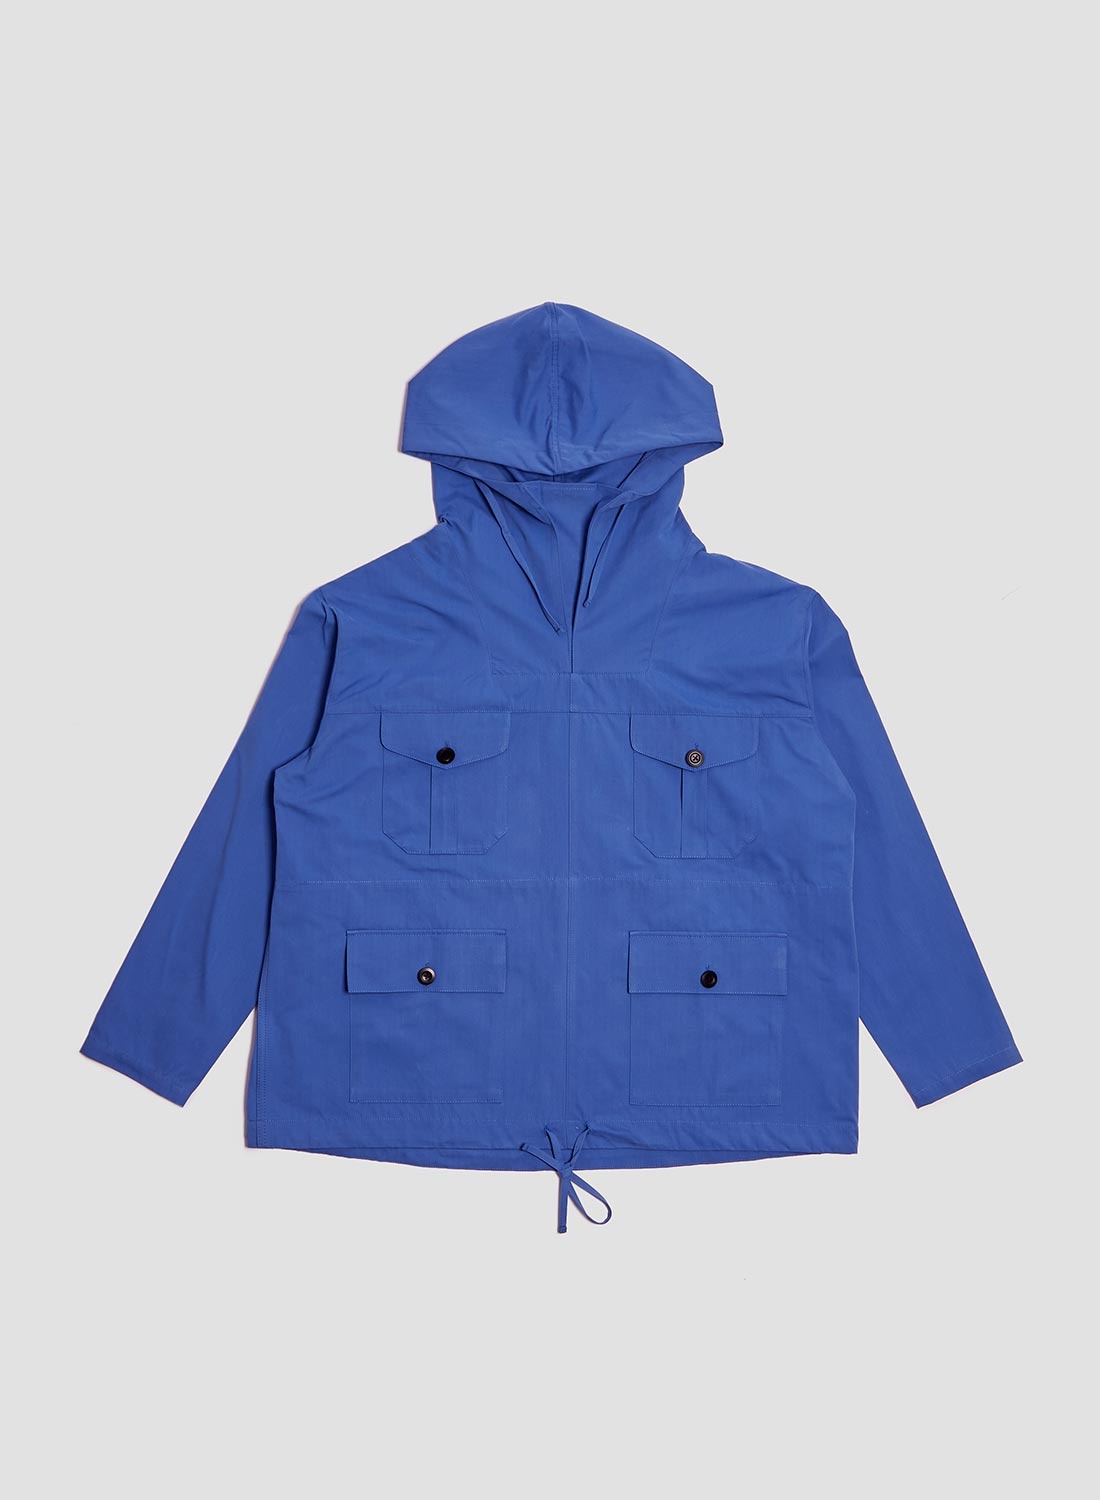 British Army Smock In Blue - 1